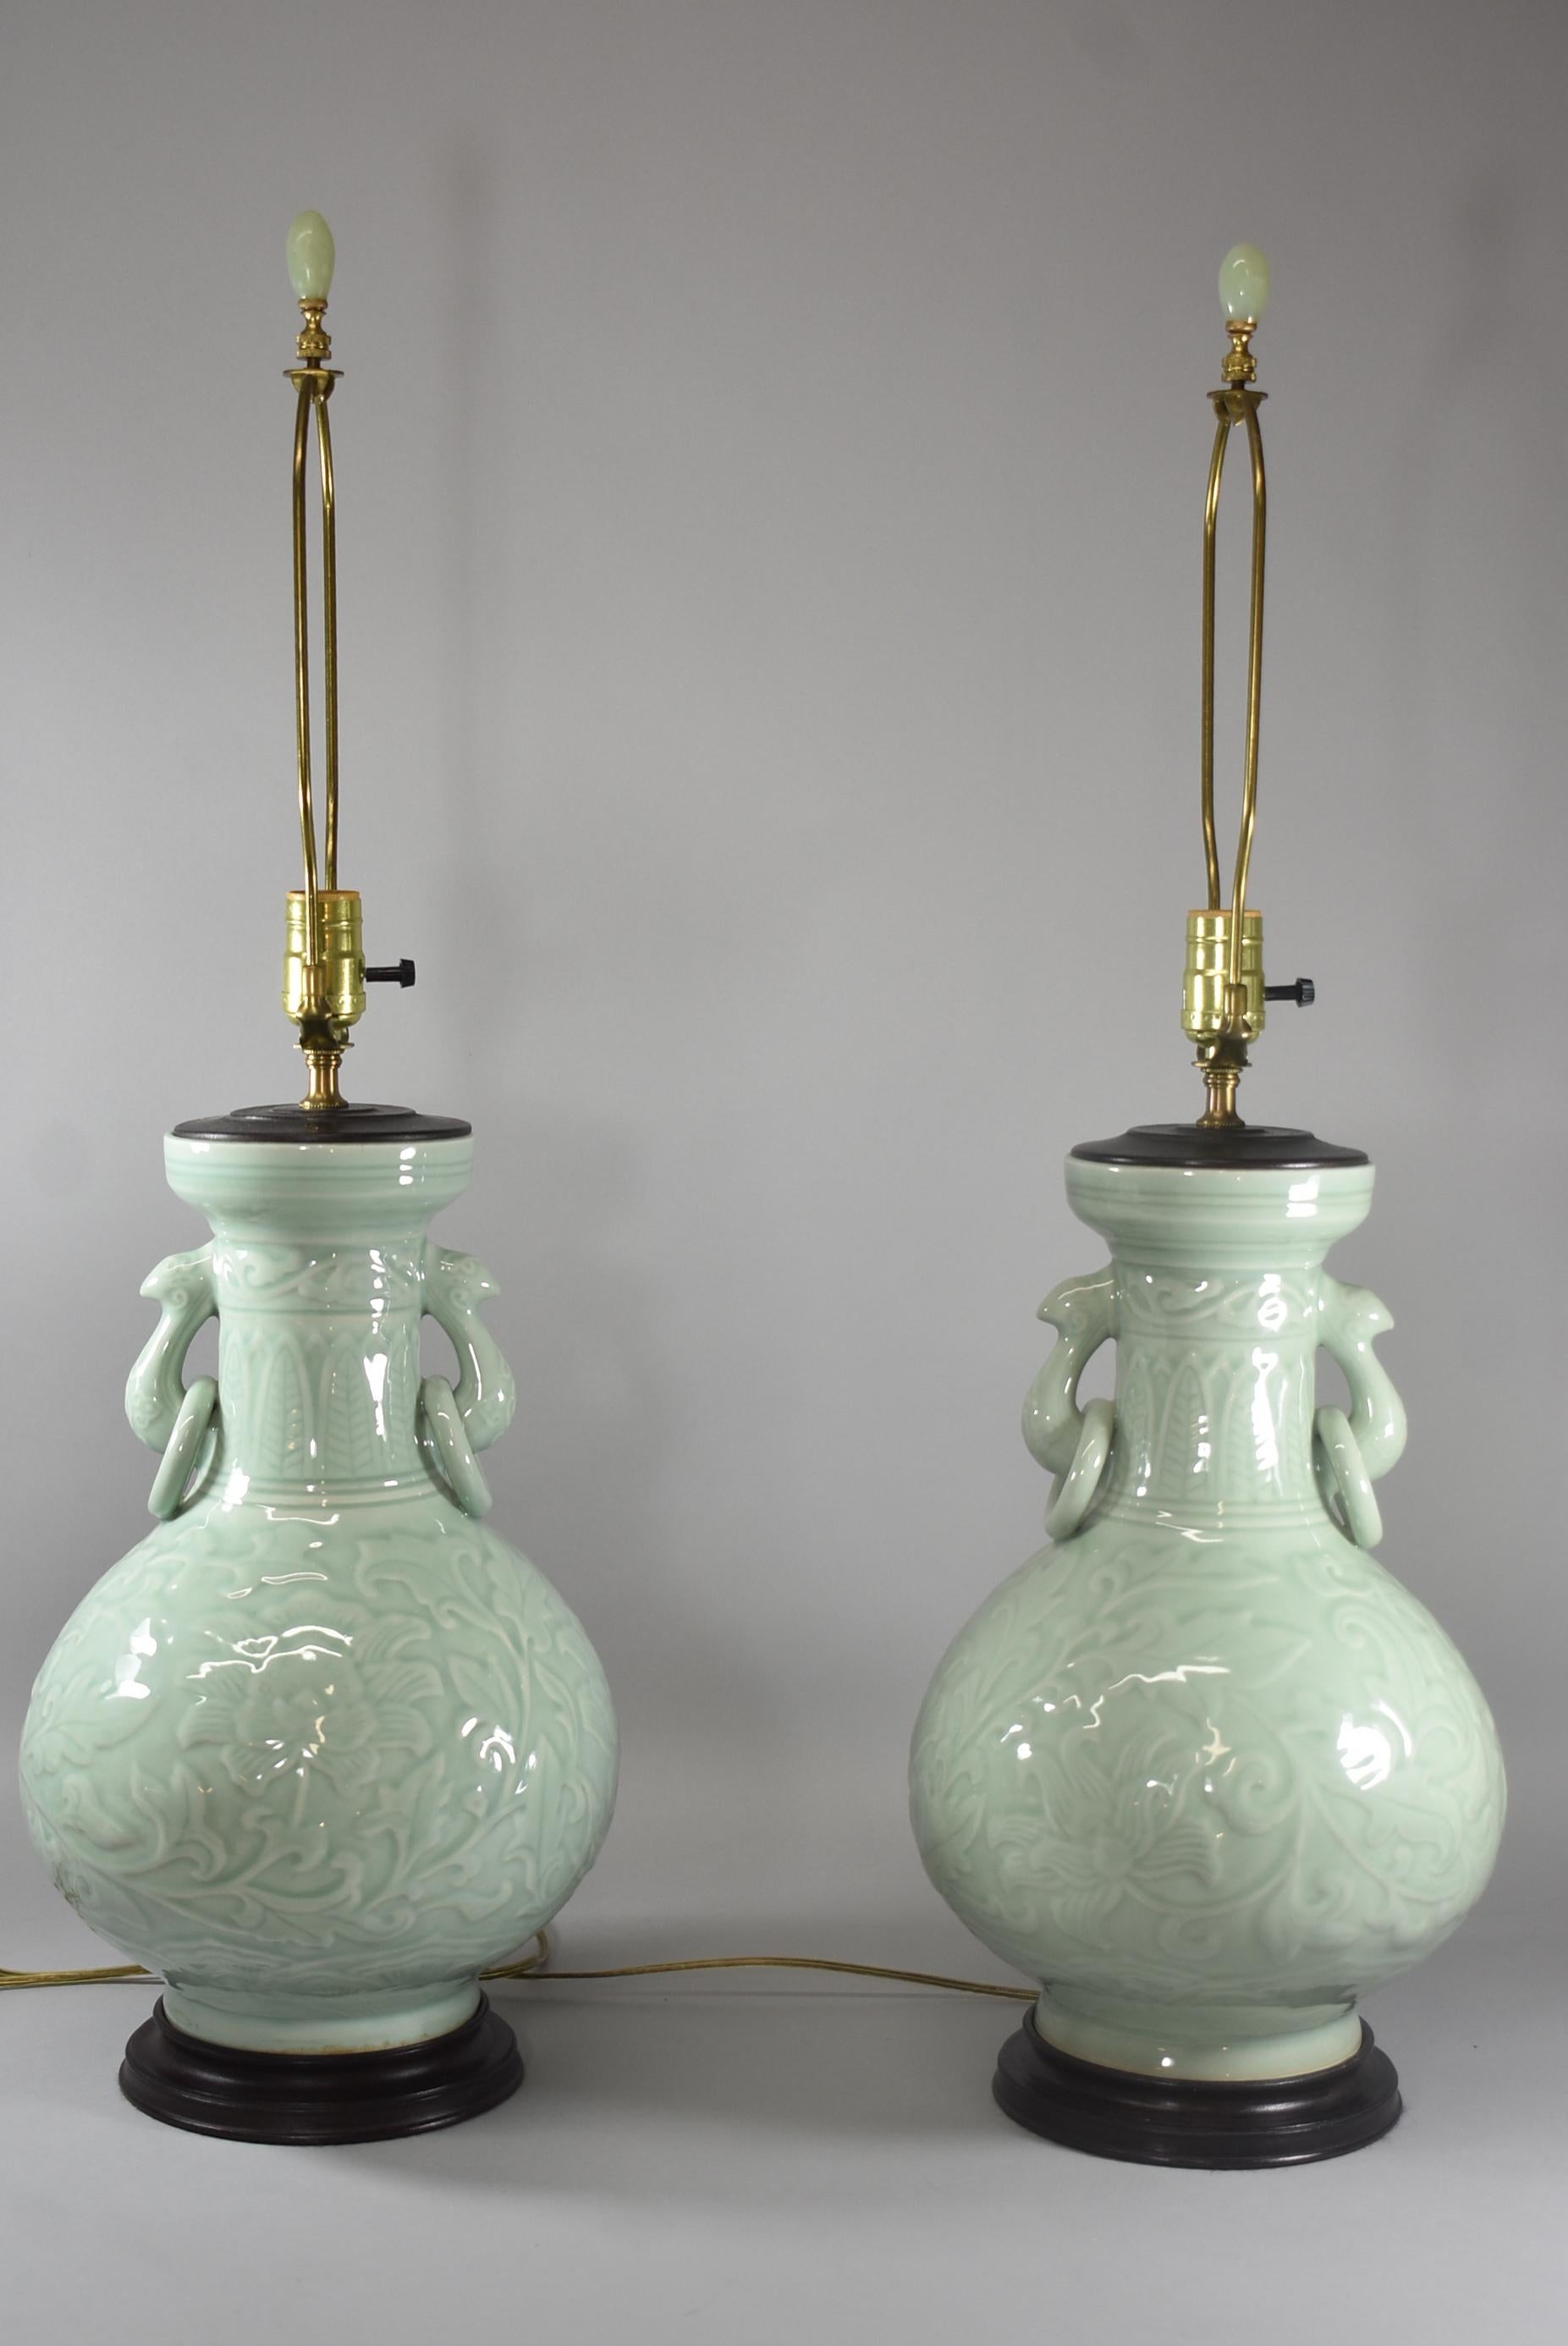 Pair of sea-foam green antique Celadon porcelain Asian lamps. The lamps feature a stunning celadon finish over subtle floral detailing. Mid-20th century urn style, ring handles, wooden bases, single socket, and 3-way switches. Measures: 30 1/2